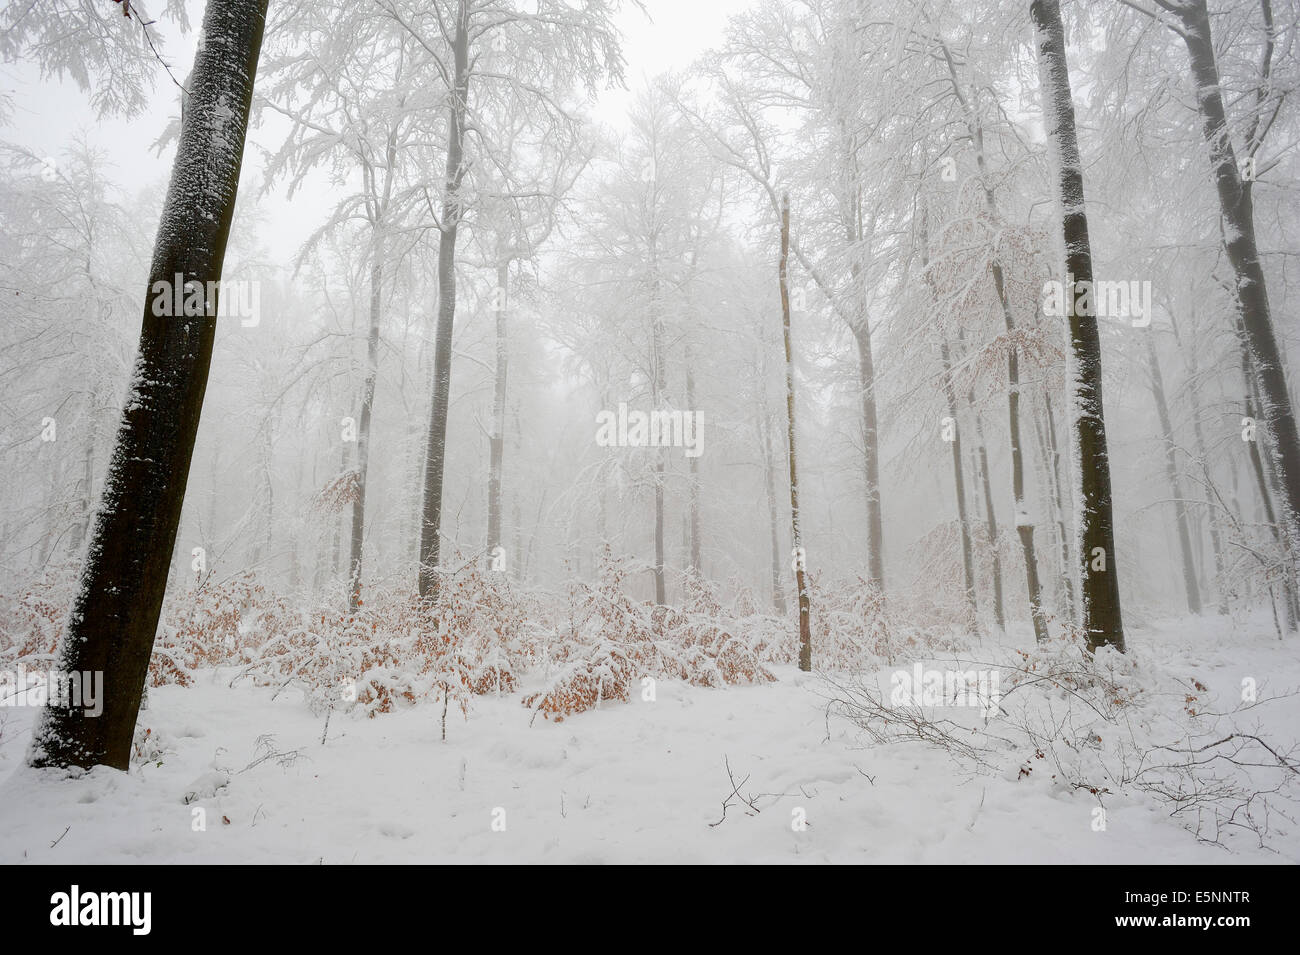 European Beech or Common Beech forest in winter (Fagus sylvatica), North Rhine-Westphalia, Germany Stock Photo